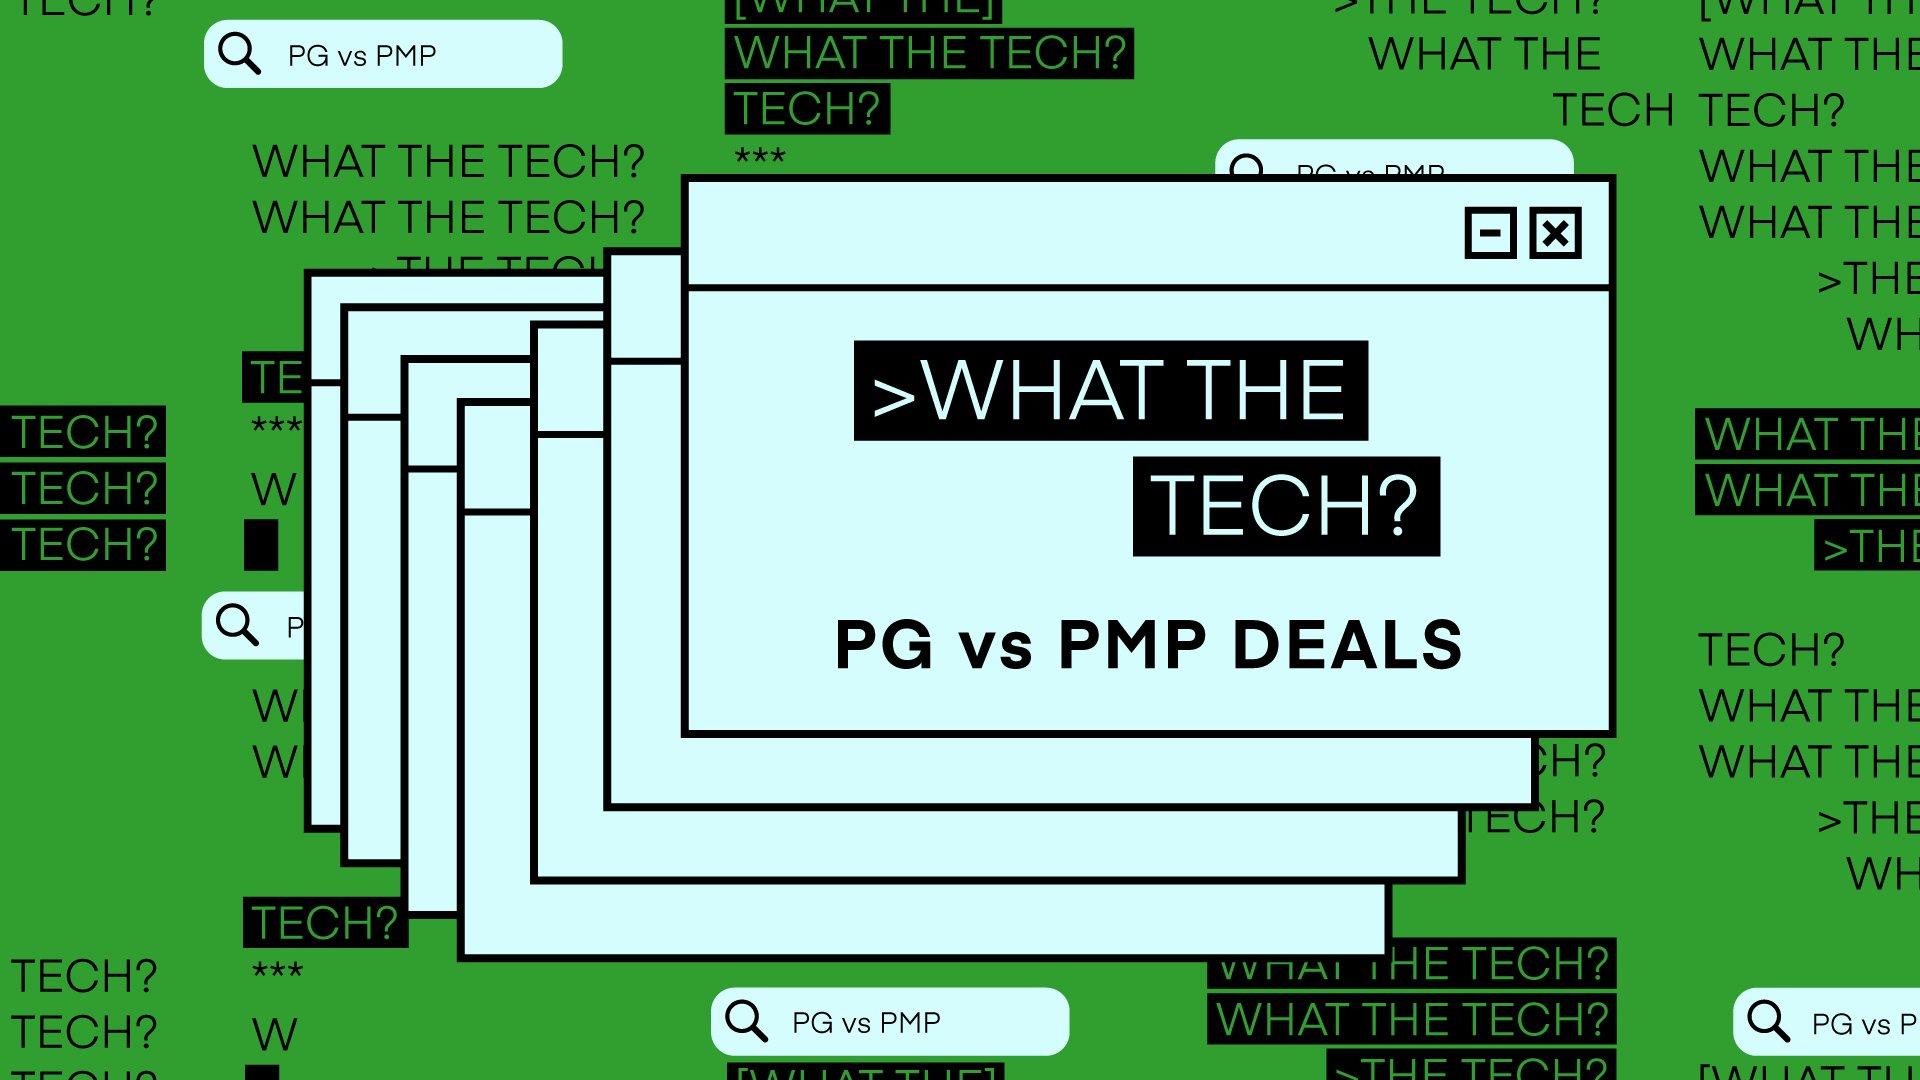 What the Tech are PG vs PMP deals?